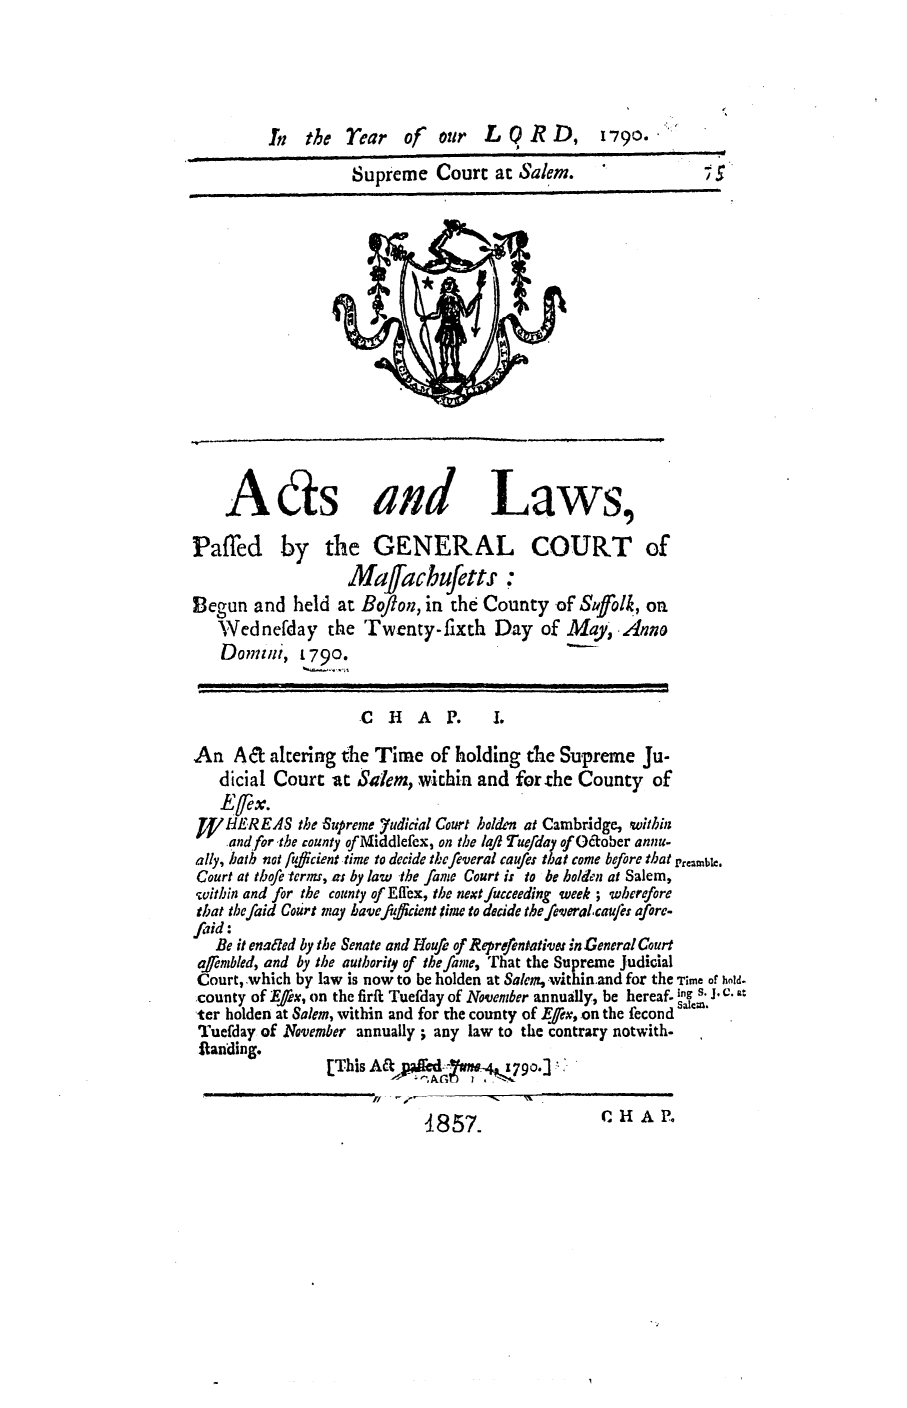 handle is hein.ssl/ssma0304 and id is 1 raw text is: Supreme Court at Salem.  5

Aas and

Laws,

Paffed by the GENERAL COURT of
Mafacbufetts :
Begun and held at Boflon, in the County of Suffolk, on
Wednefday the 'Twenty-fixth Day of May, Anno
Domuti, L 790.

CHAP.

An A& altering the Time of holding the Supreme Ju-
dicial Court -at Salem, within and for the County of
J4/LHEREAS the Supreme Yudicial Court holden at Cambridge, within
and for ,the county of Middlefex, on the lafl Tue/iday of O&ober annu-
ally, bath not ufficient time to decide the feveral caufes that come before that Preamble.
Court at thofe terms, as by law the fame Court is to be holden at Salem,
within and for the county of Efflex, the next fucceeding week ; wherefore
that tbefaid Court may have fuffidcnt time to decide the-feveralcaufi: afore-
firid:
Be it enated by the Senate and loufe of Reprefentatives in General Court
qaembled, and by the authority of the fame, That the Supreme Judical
Court, .which by law is now to be holden at Salem, within.and for the Time of hold.
county of E fflx, on the firft Tuefday of November annually, be hereaf, ig s. J. C. -
ter holden at Salem, within and for the county of Efex, on the fecond salm.
Tuefday of November annually; any law to the contrary notwith-
Randing.
[Th      is - N

CH A P.

4857.

L 0RD$

In the rear off our

1790. .


